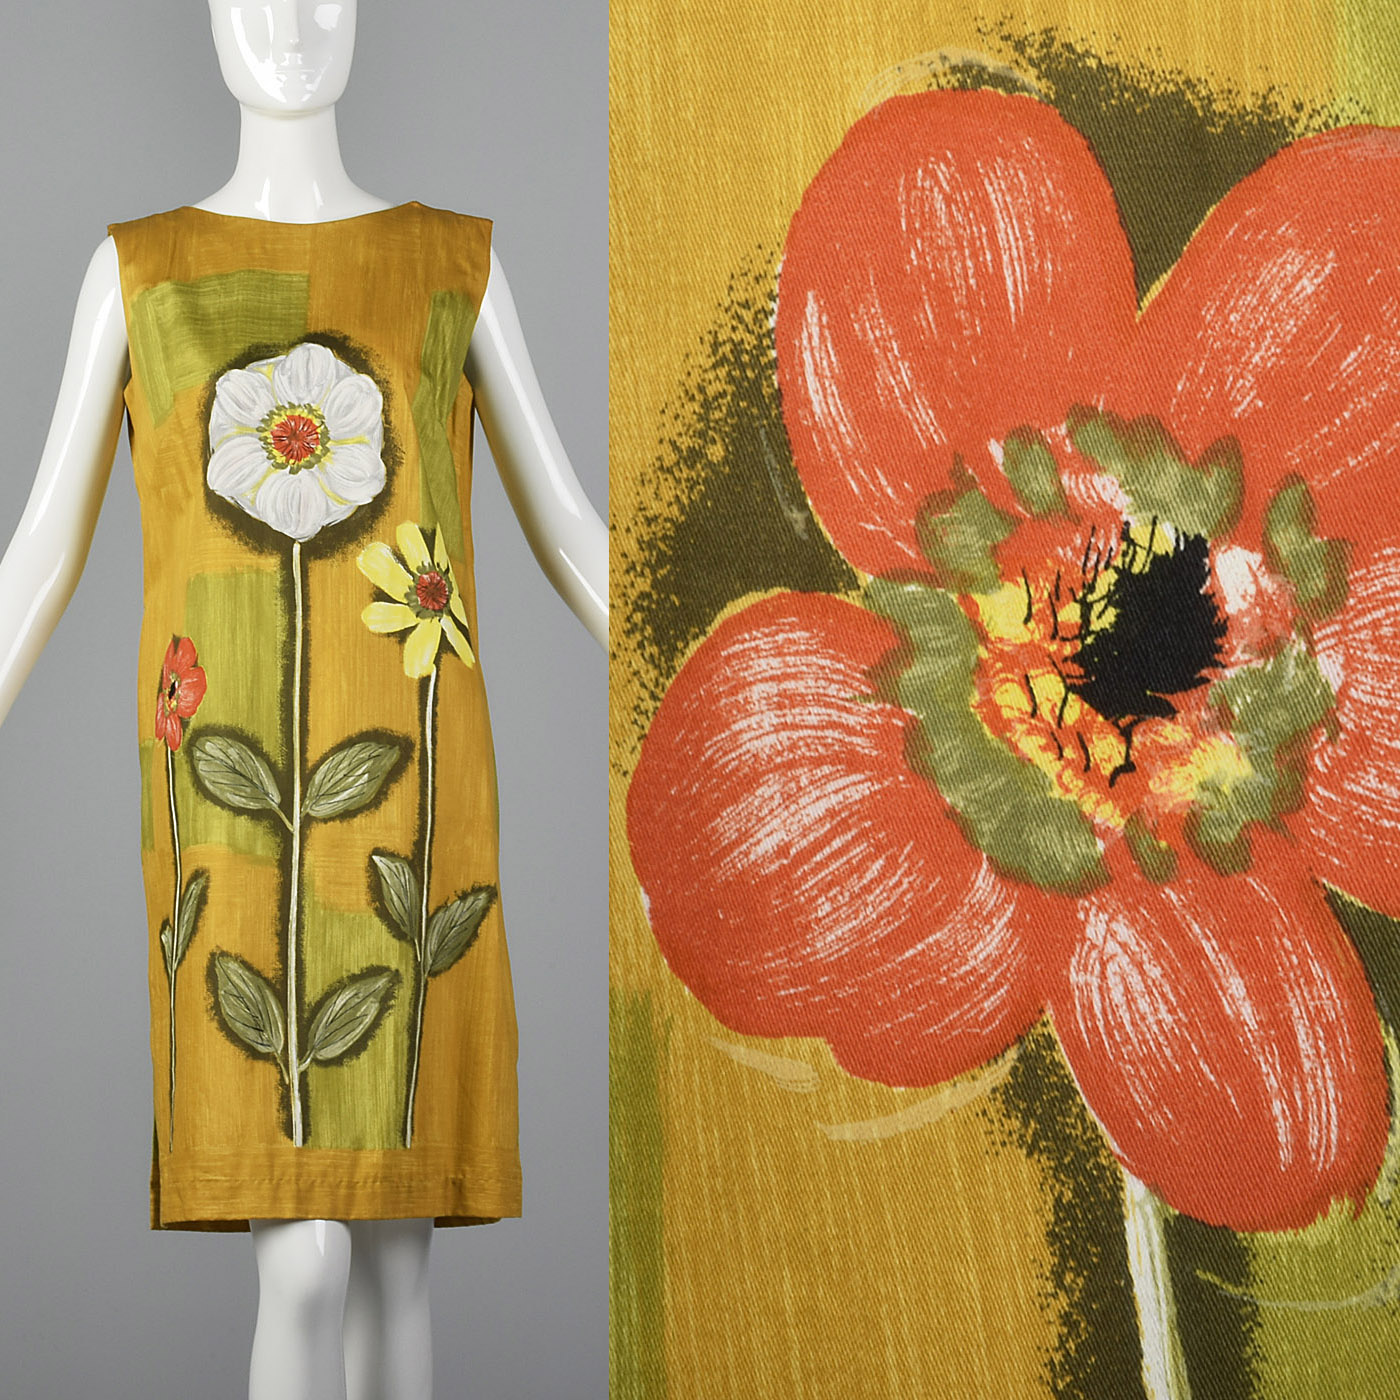 1960s Deadstock Shift Dress with Novelty Floral Print